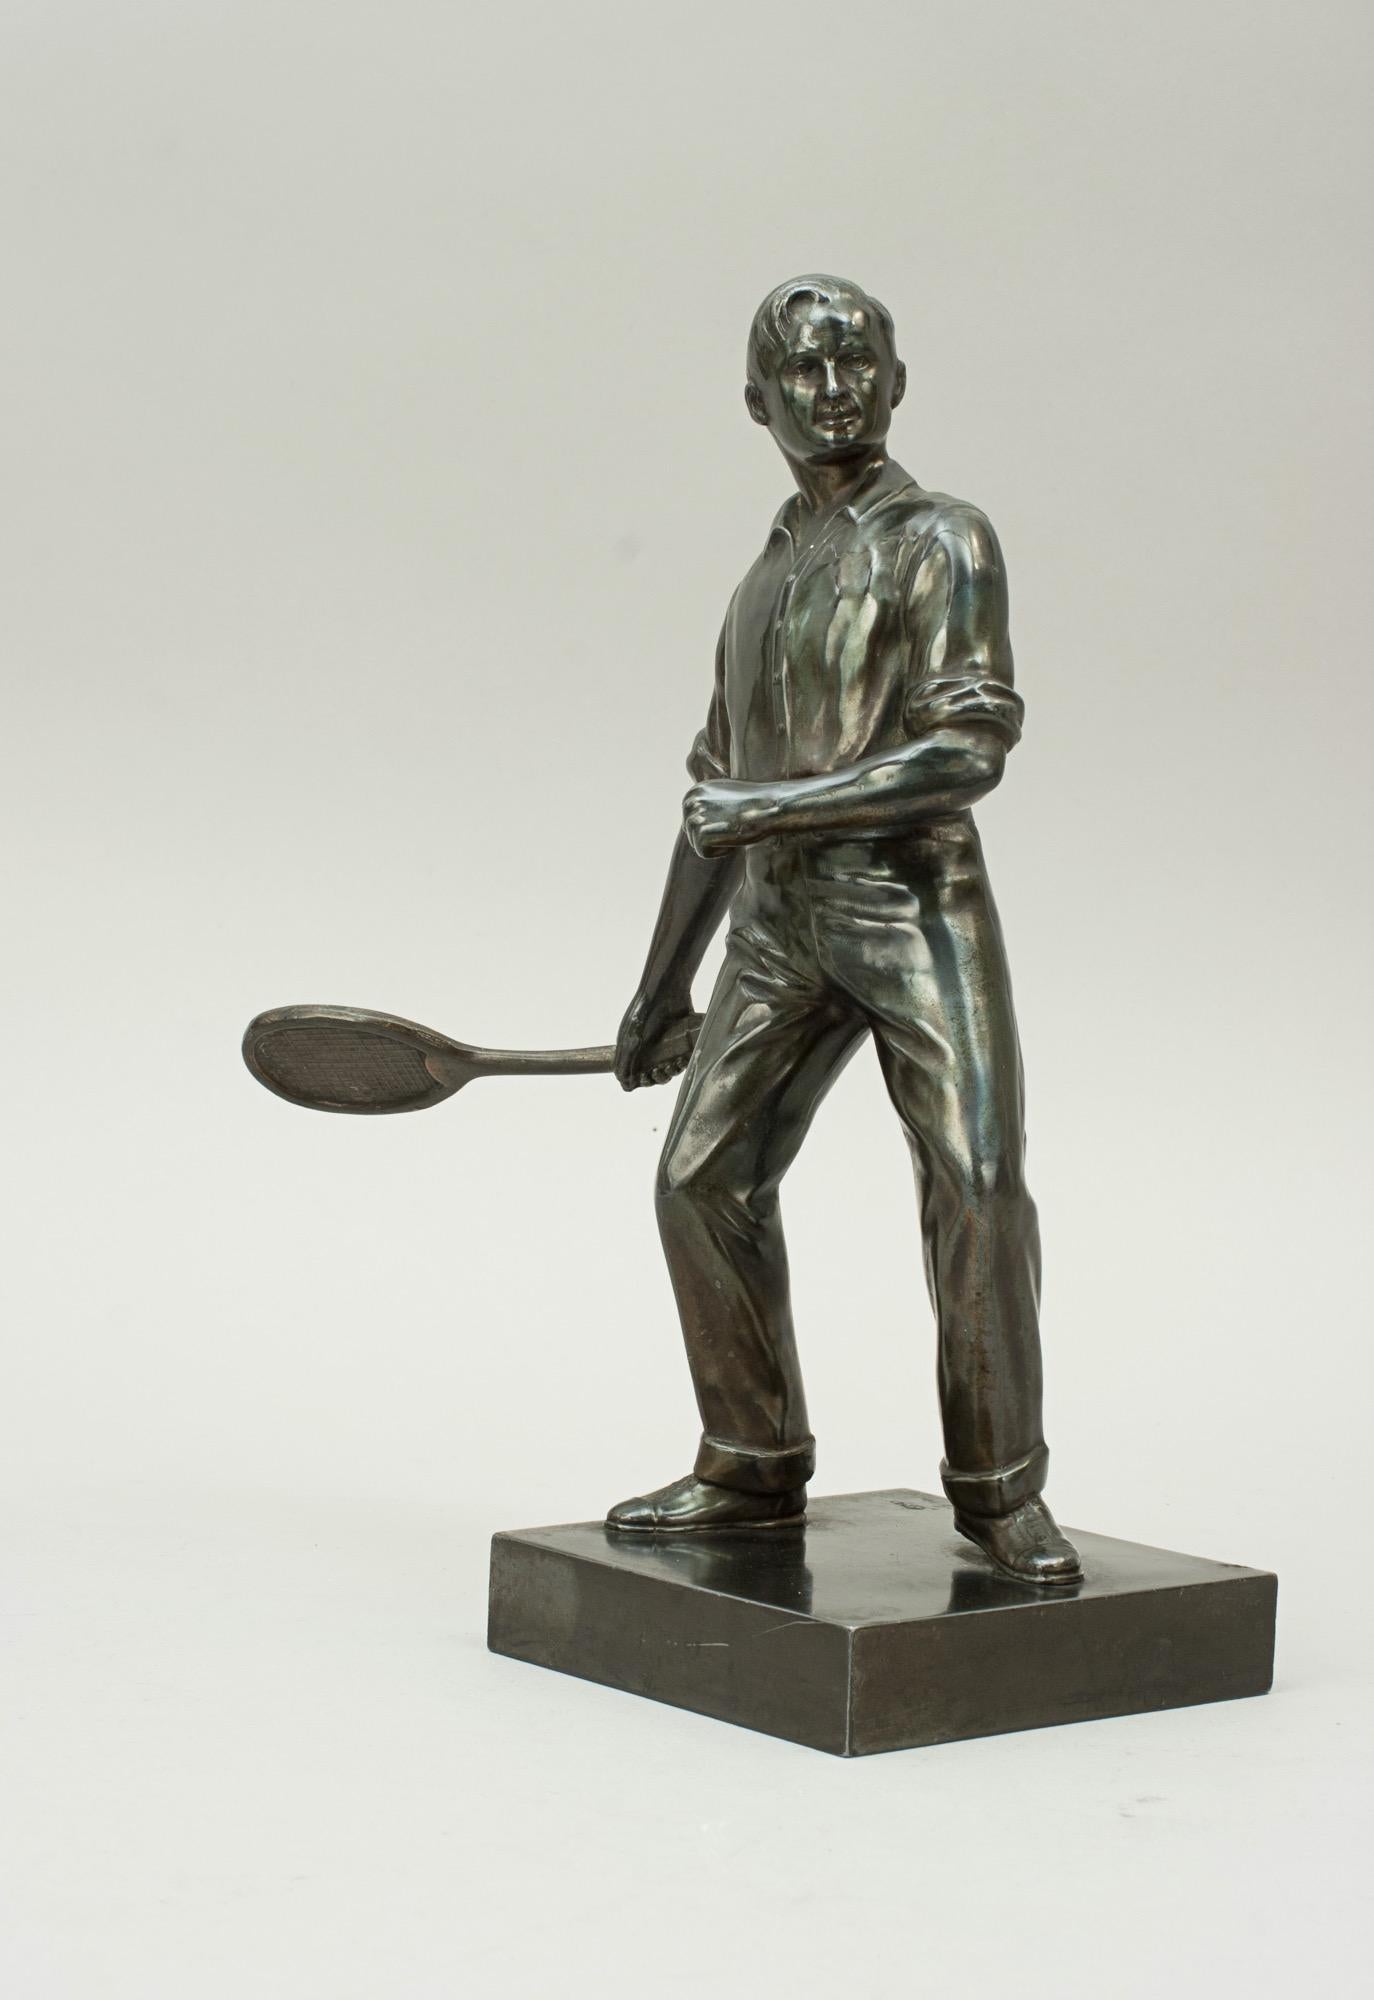 Sporting Art Antique Pair of Lawn Tennis Figures in Spelter, Doherty Brothers